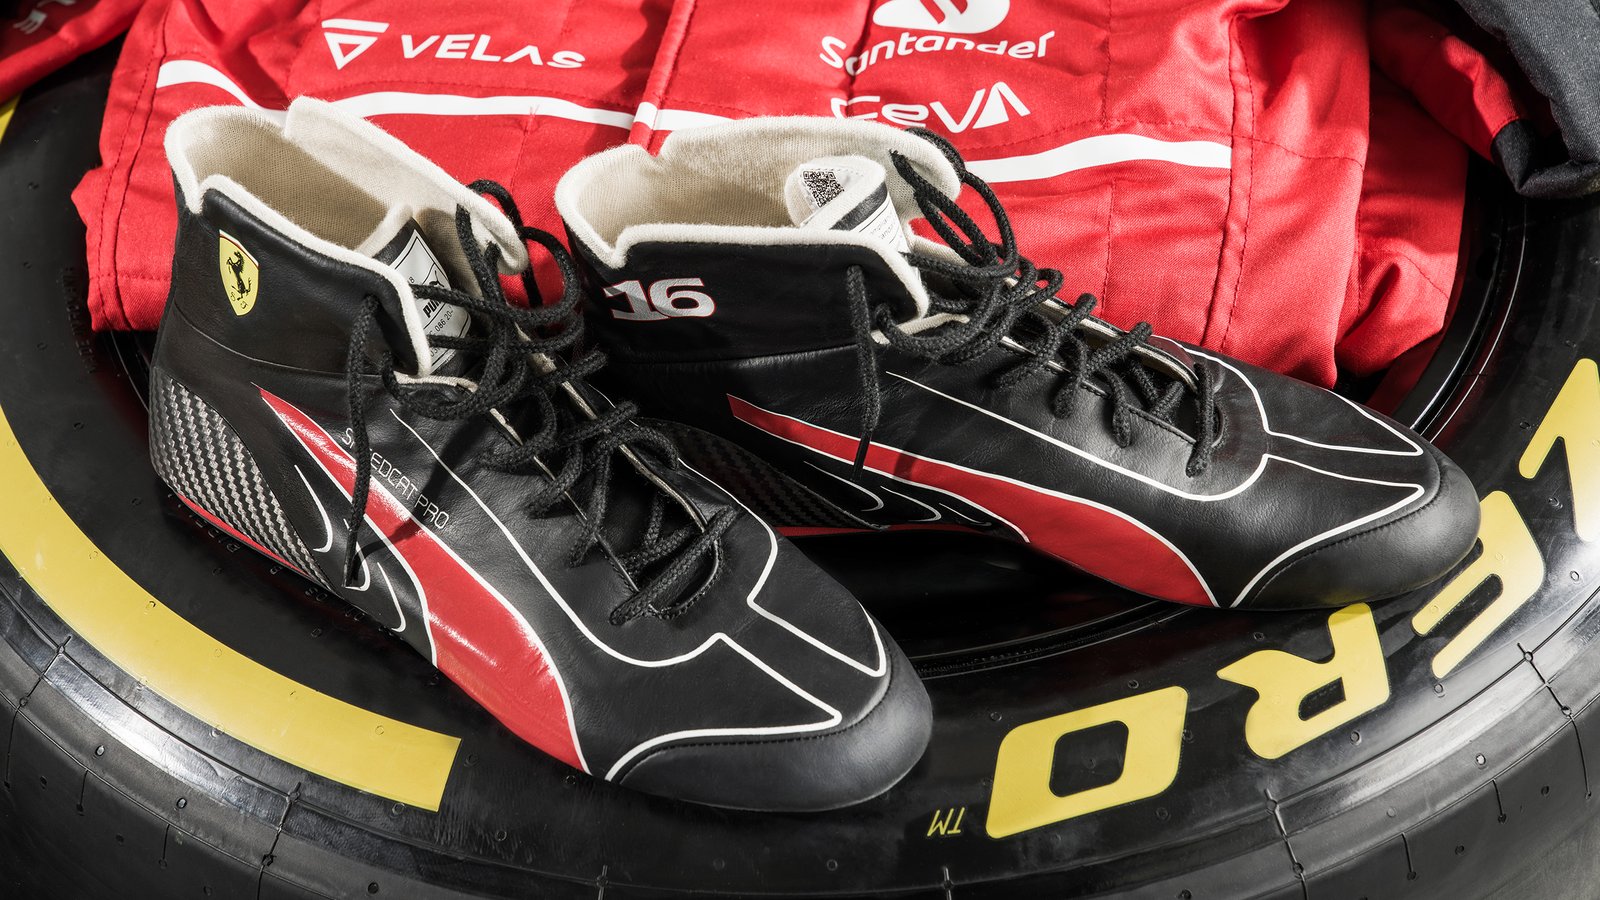 Premiere: PUMA partners with Scuderia Ferrari to launch shoes for Speedcat Pro drivers Charles Leclerc and Carlos Sainz